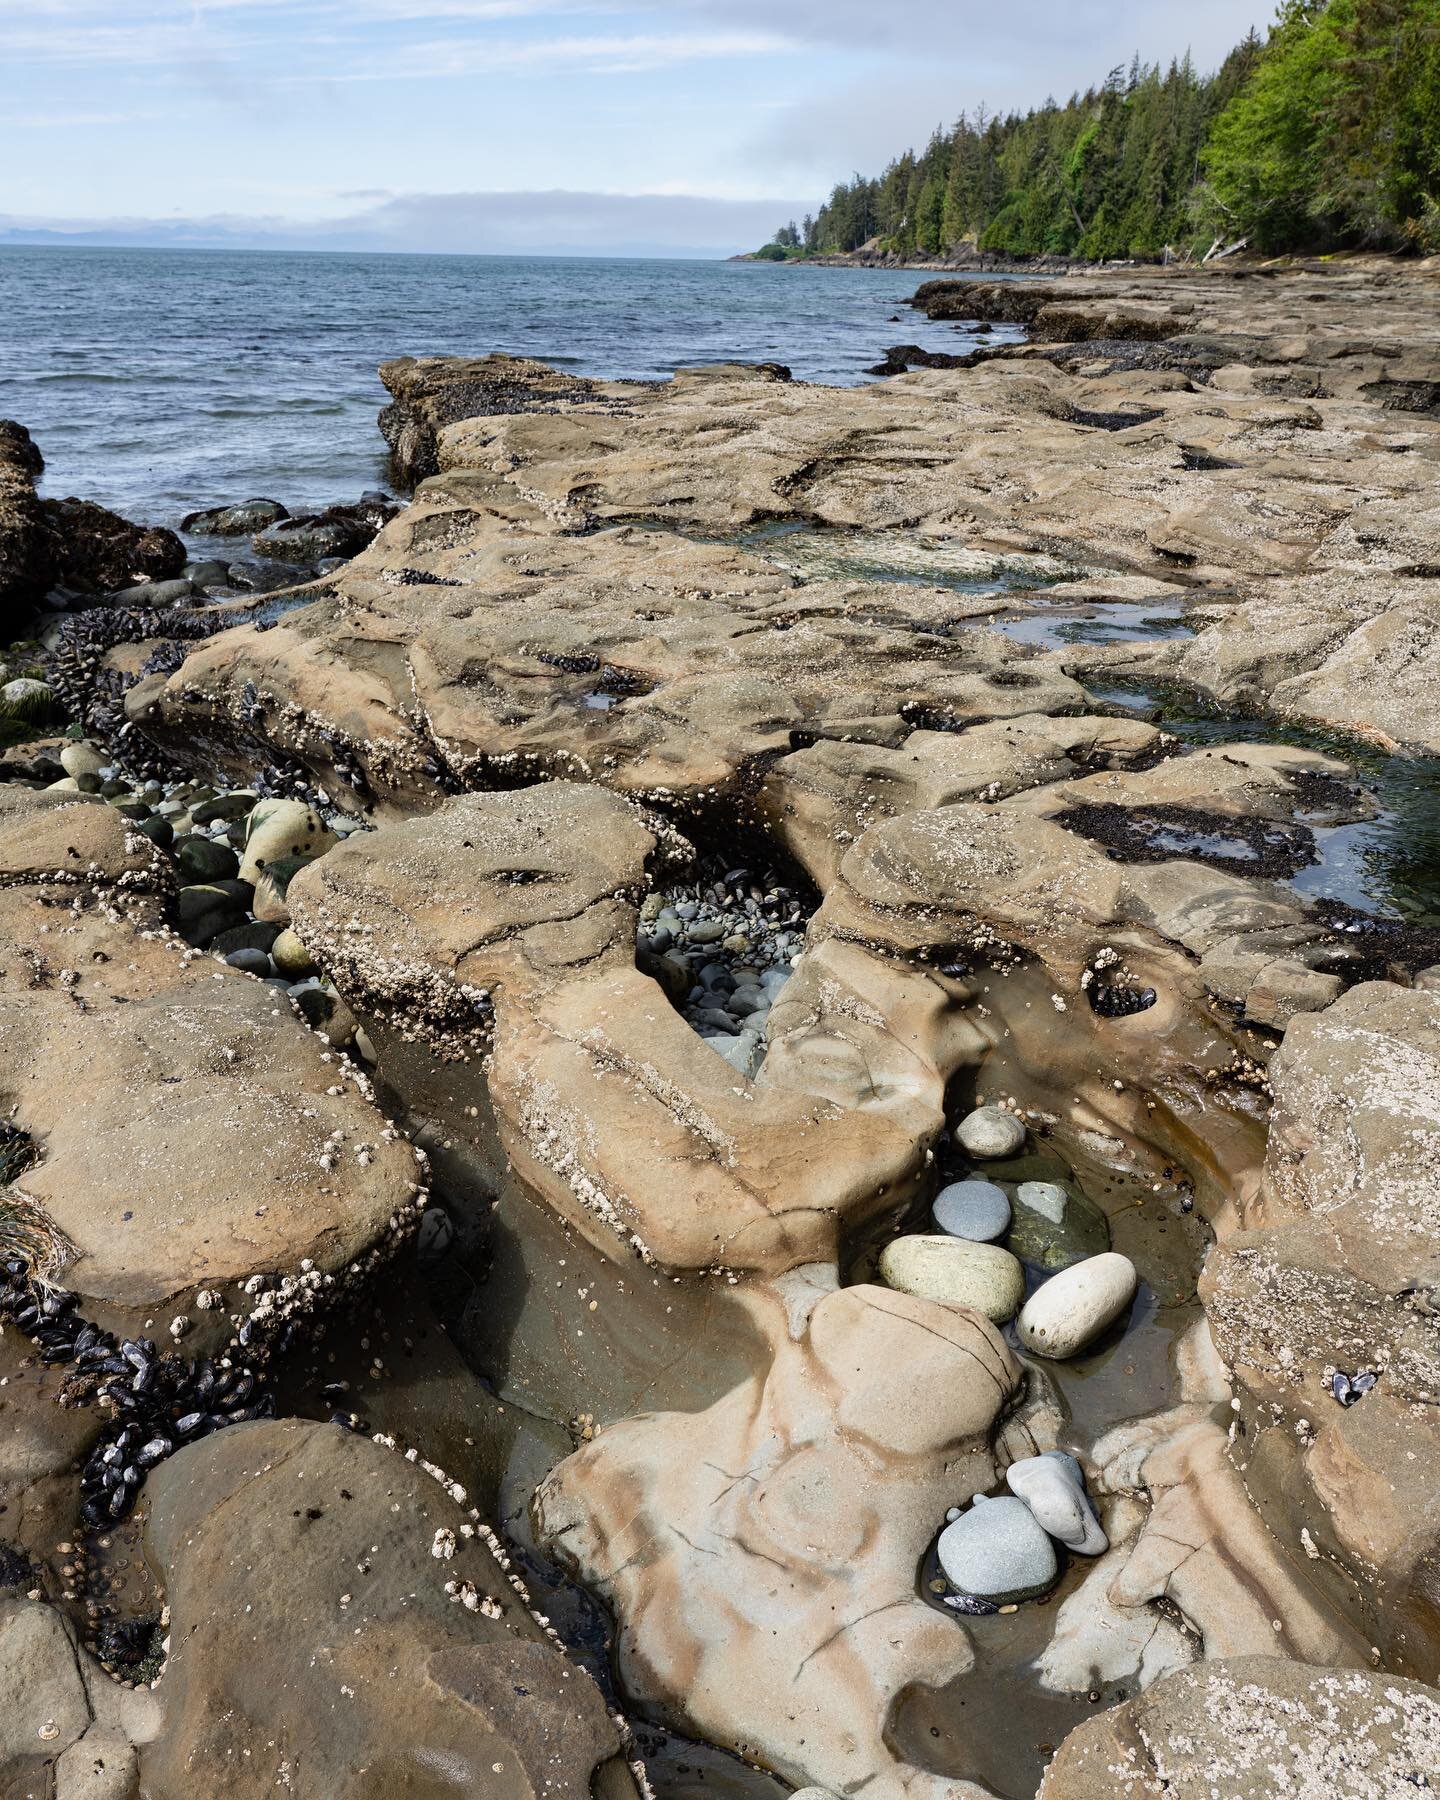 Plenty of tide pools to explore at French beach on the west coast of Vancouver island.